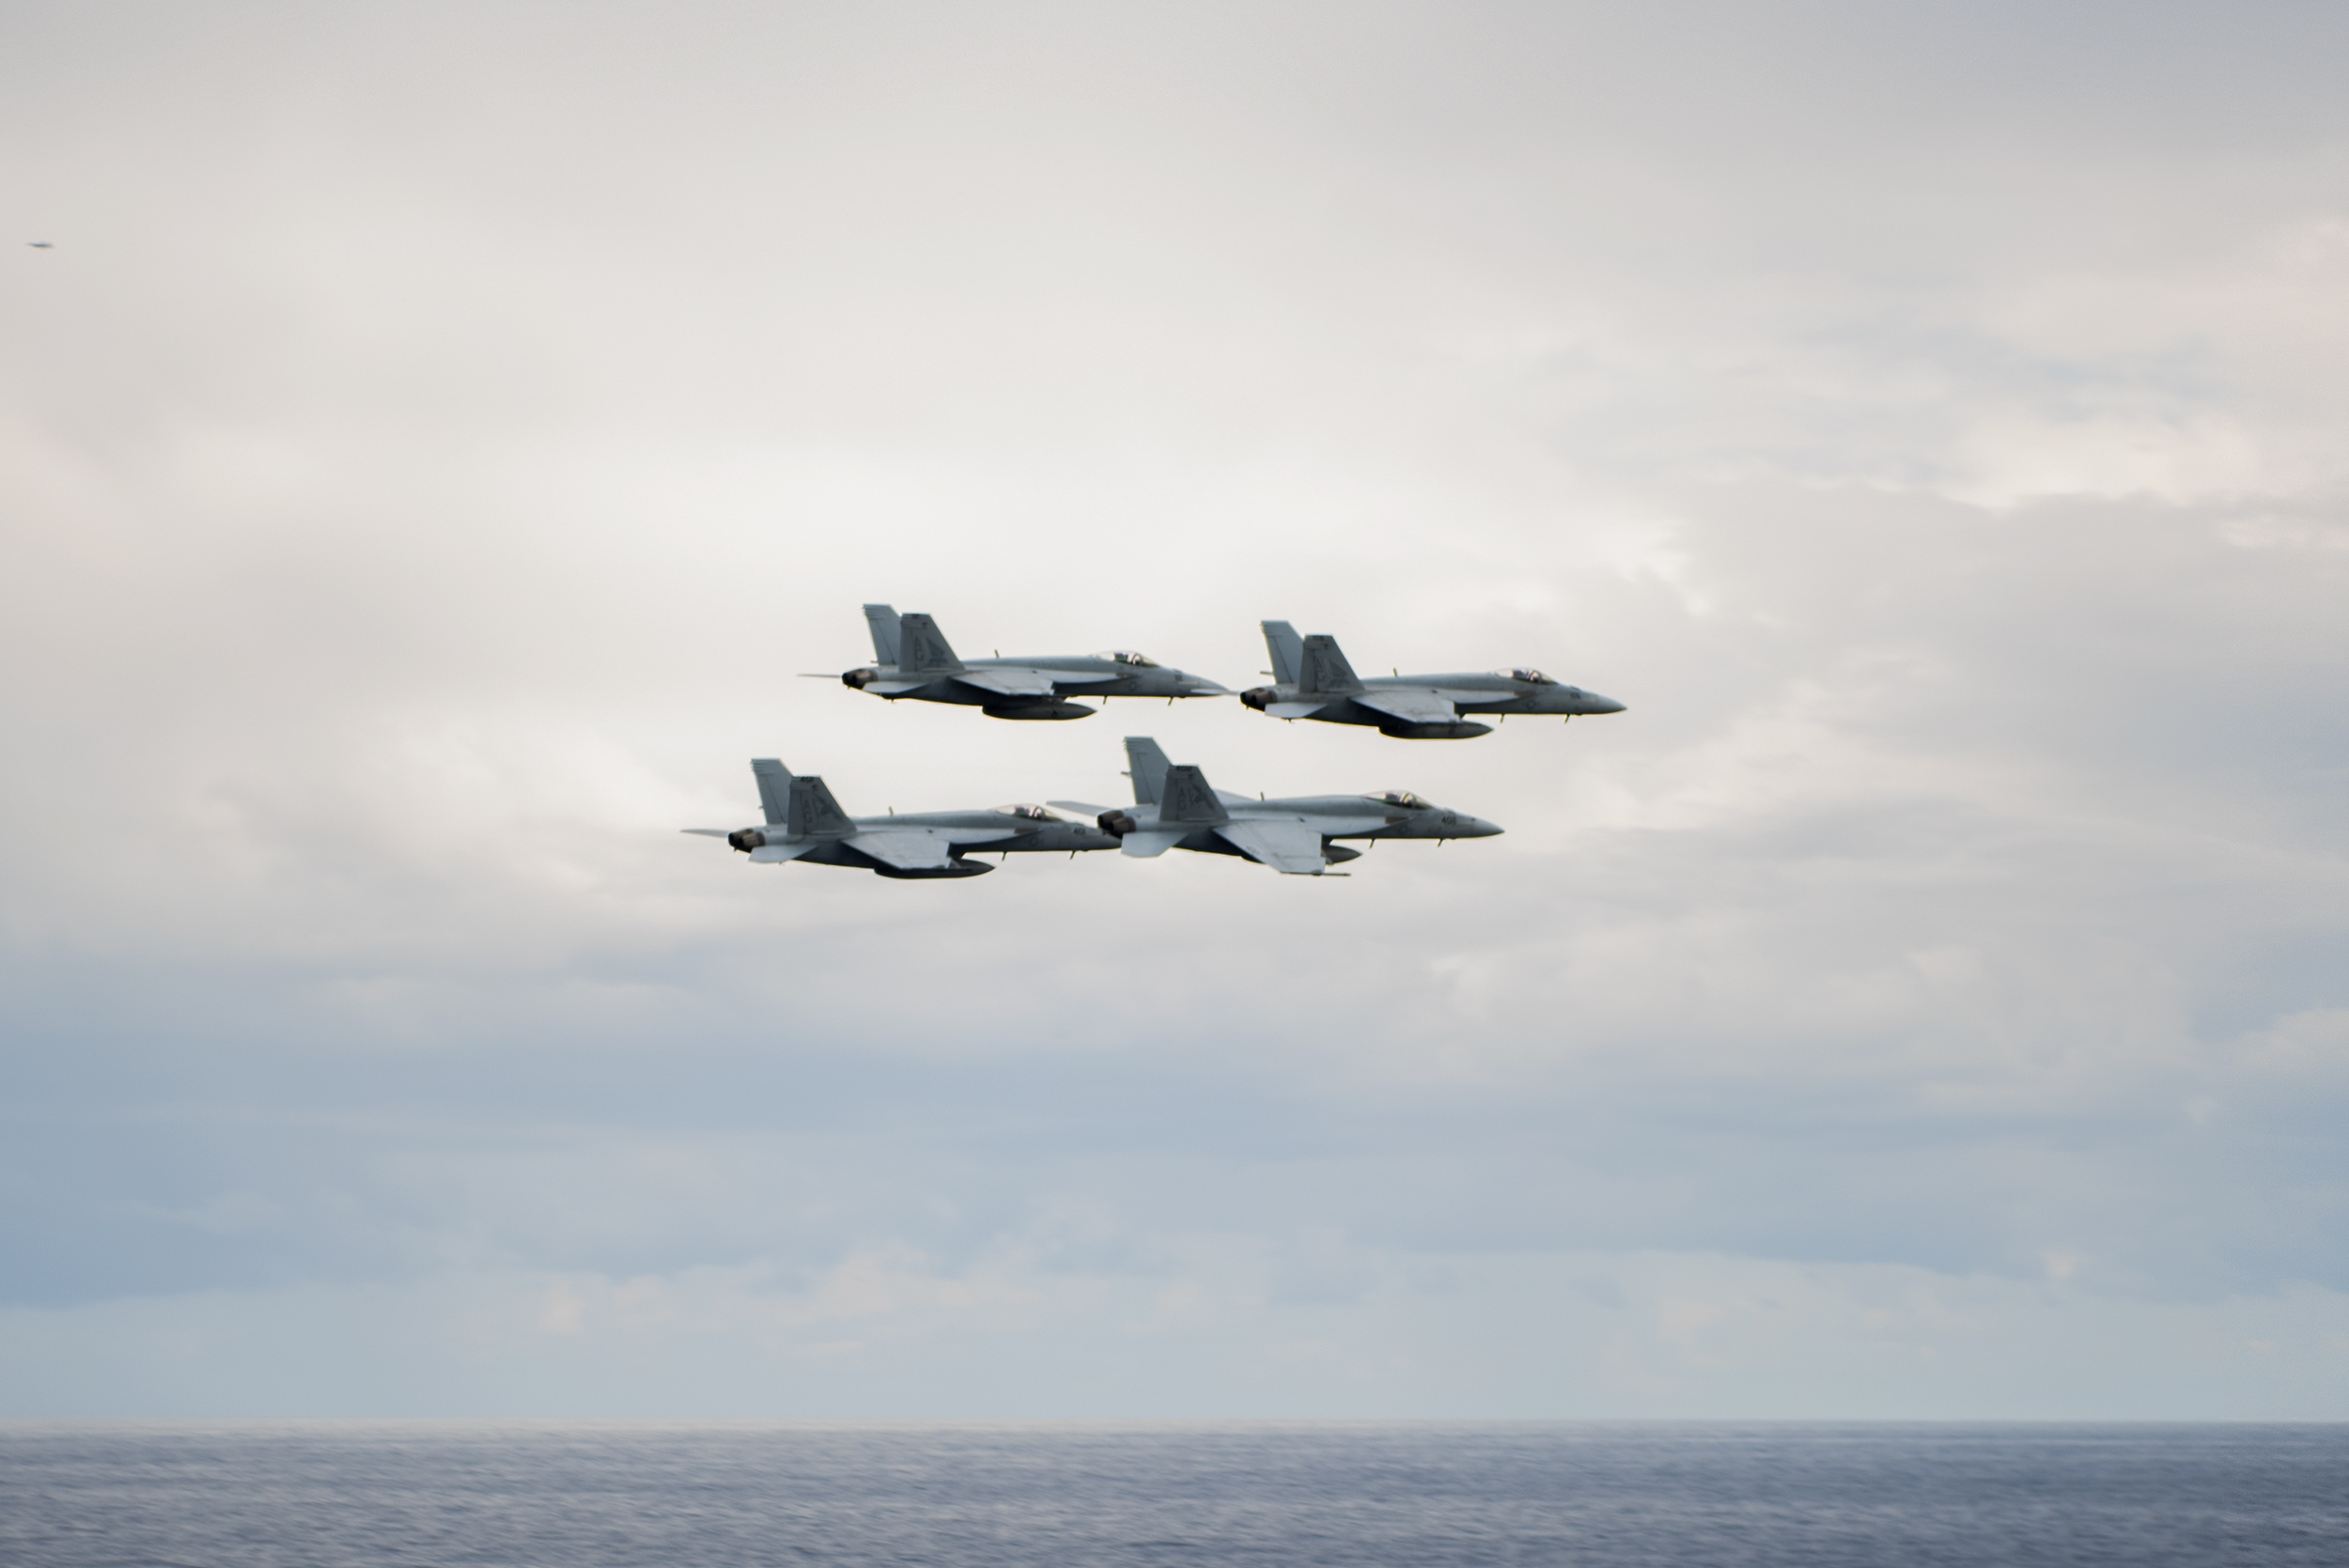 Aircraft assigned to Carrier Air Wing 7 perform a formation flyby off the port side of aircraft carrier USS Harry S. Truman (CVN 75) on Dec. 13, just prior to the ship transiting from U.S. 6th Fleet to U.S. 5th Fleet. US Navy photo.